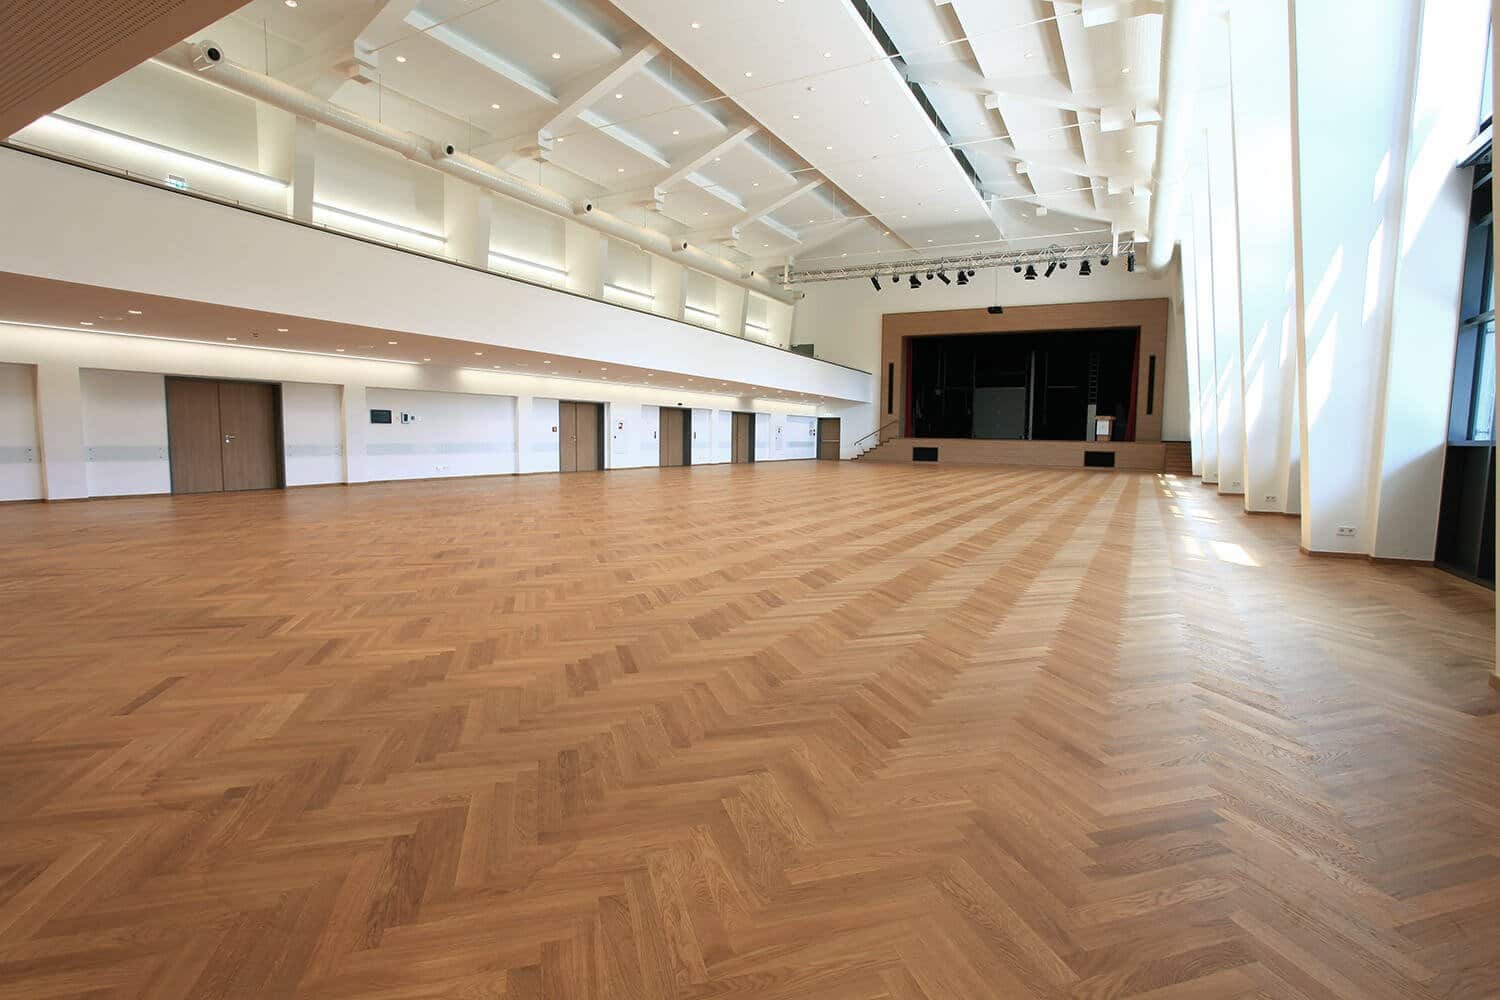 Renovation of a town hall with strip parquet